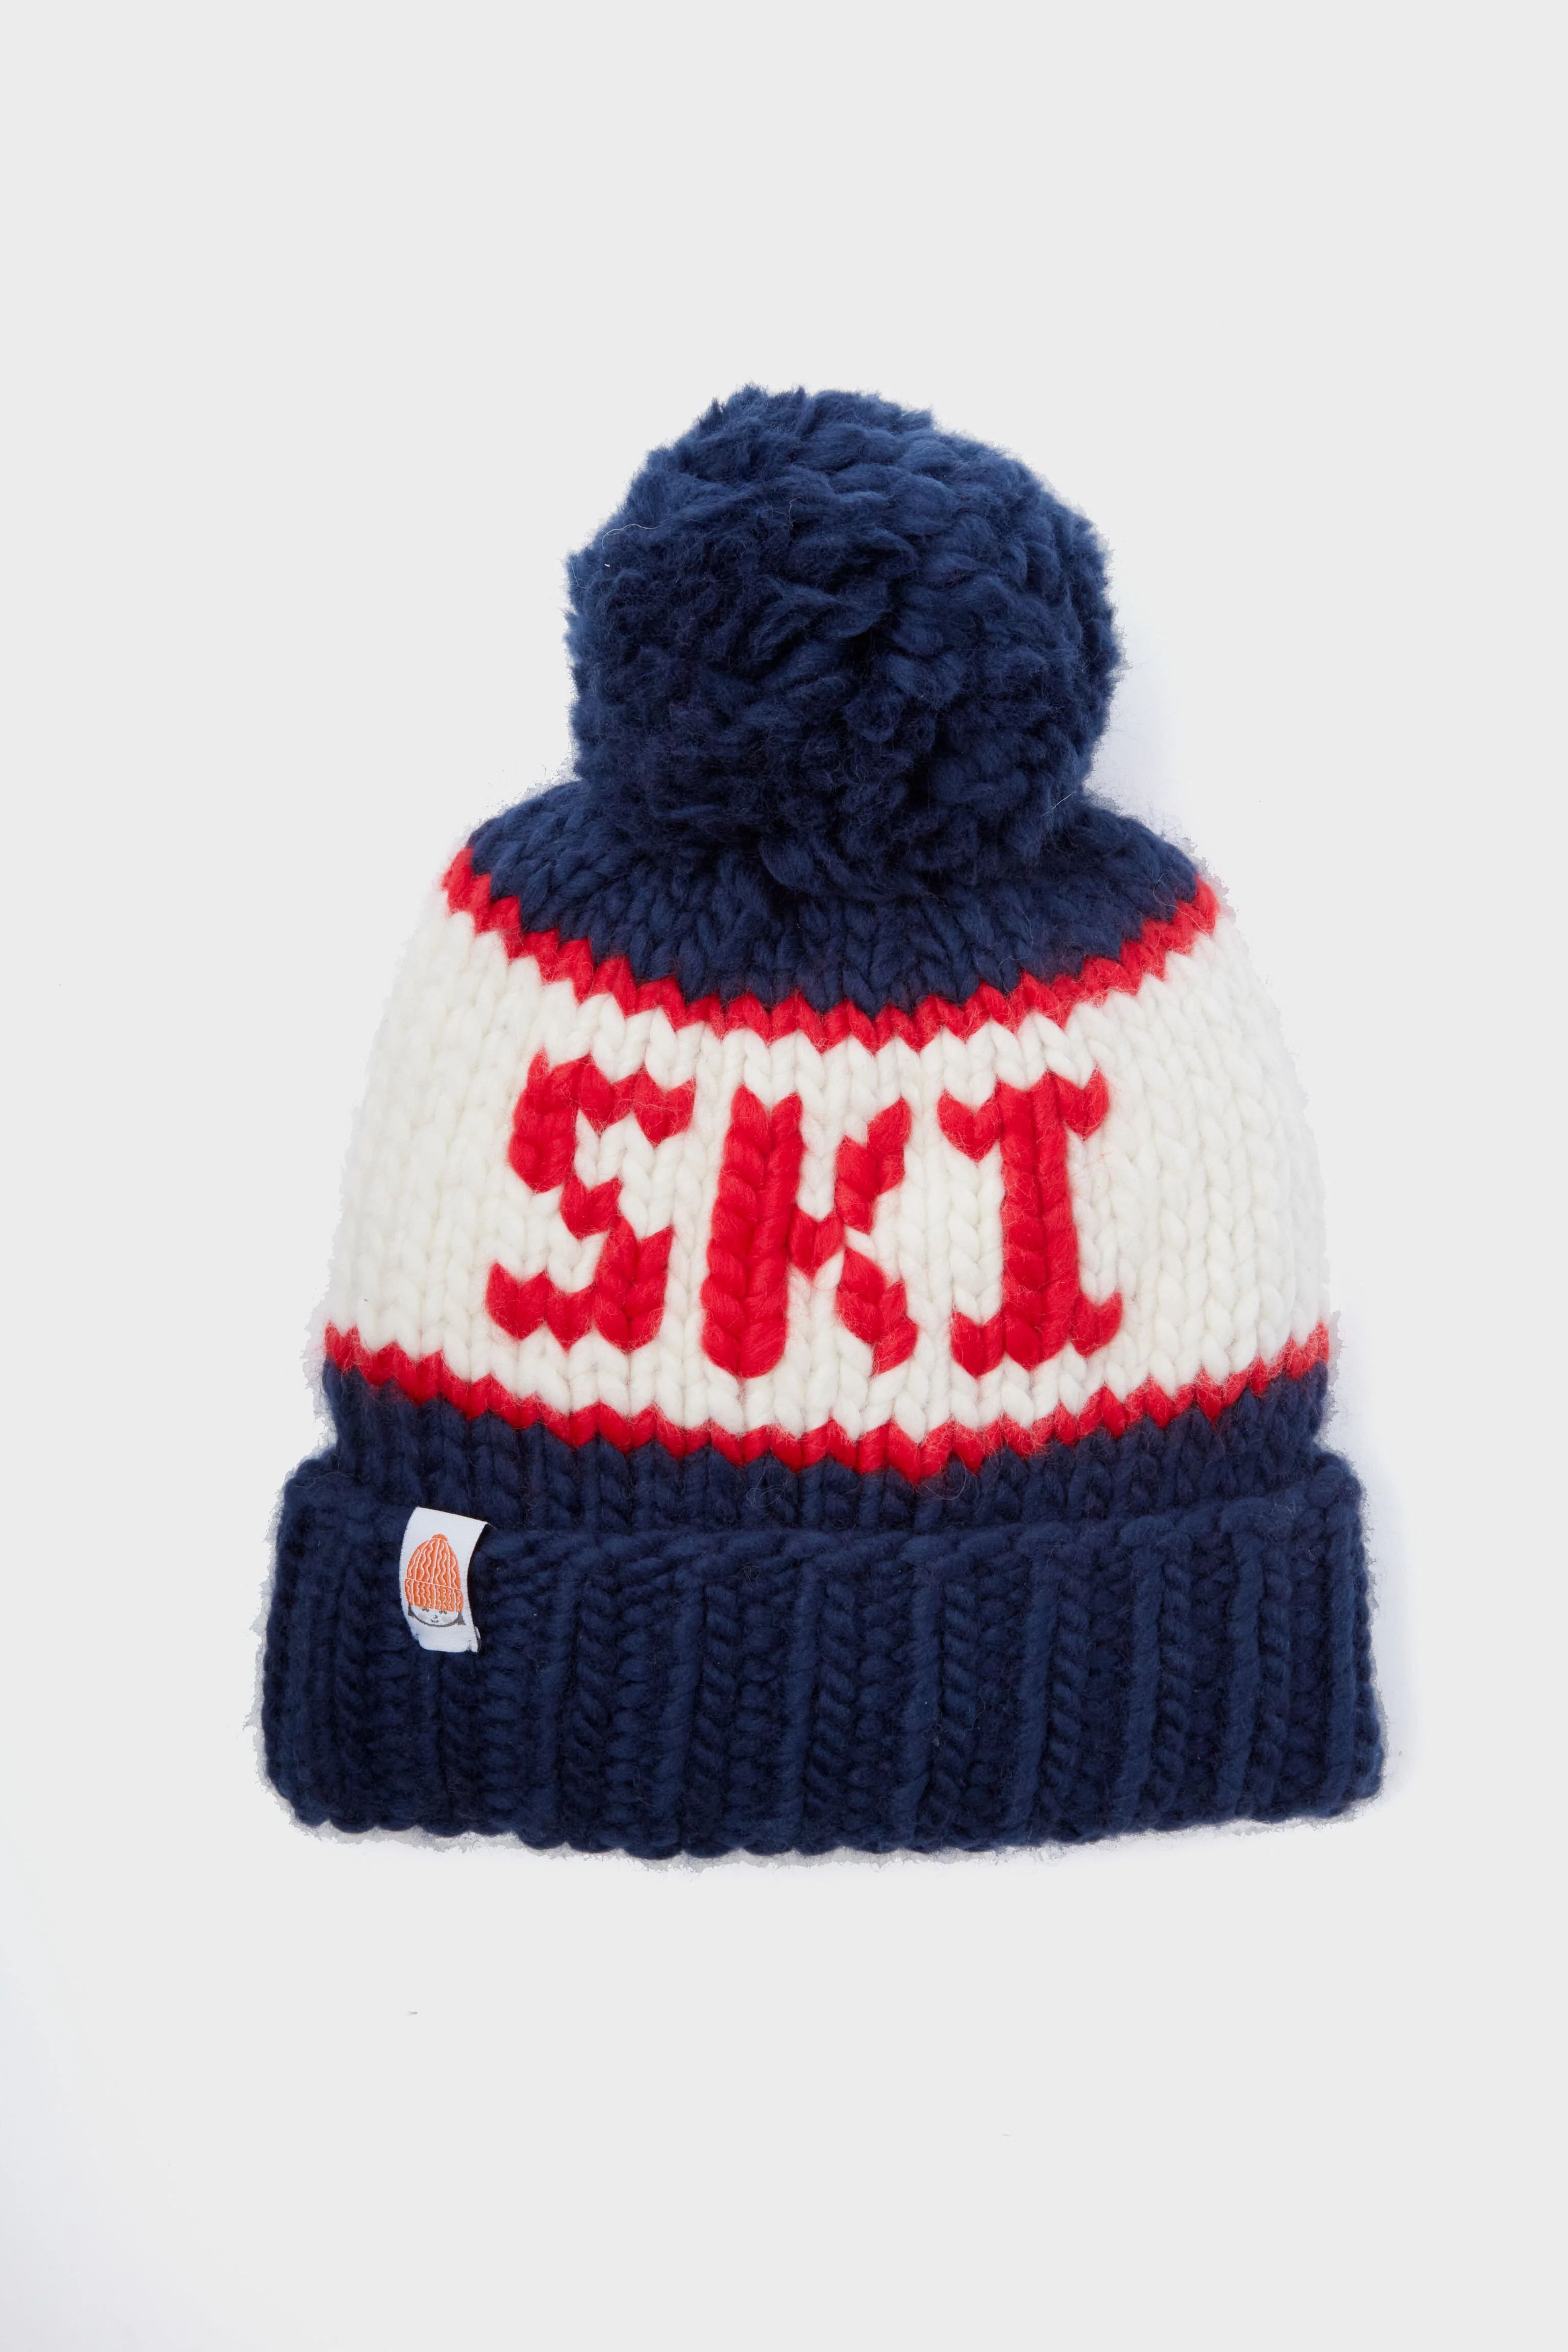 Exclusive Navy and Hot Red Ski Beanie | Tuckernuck (US)